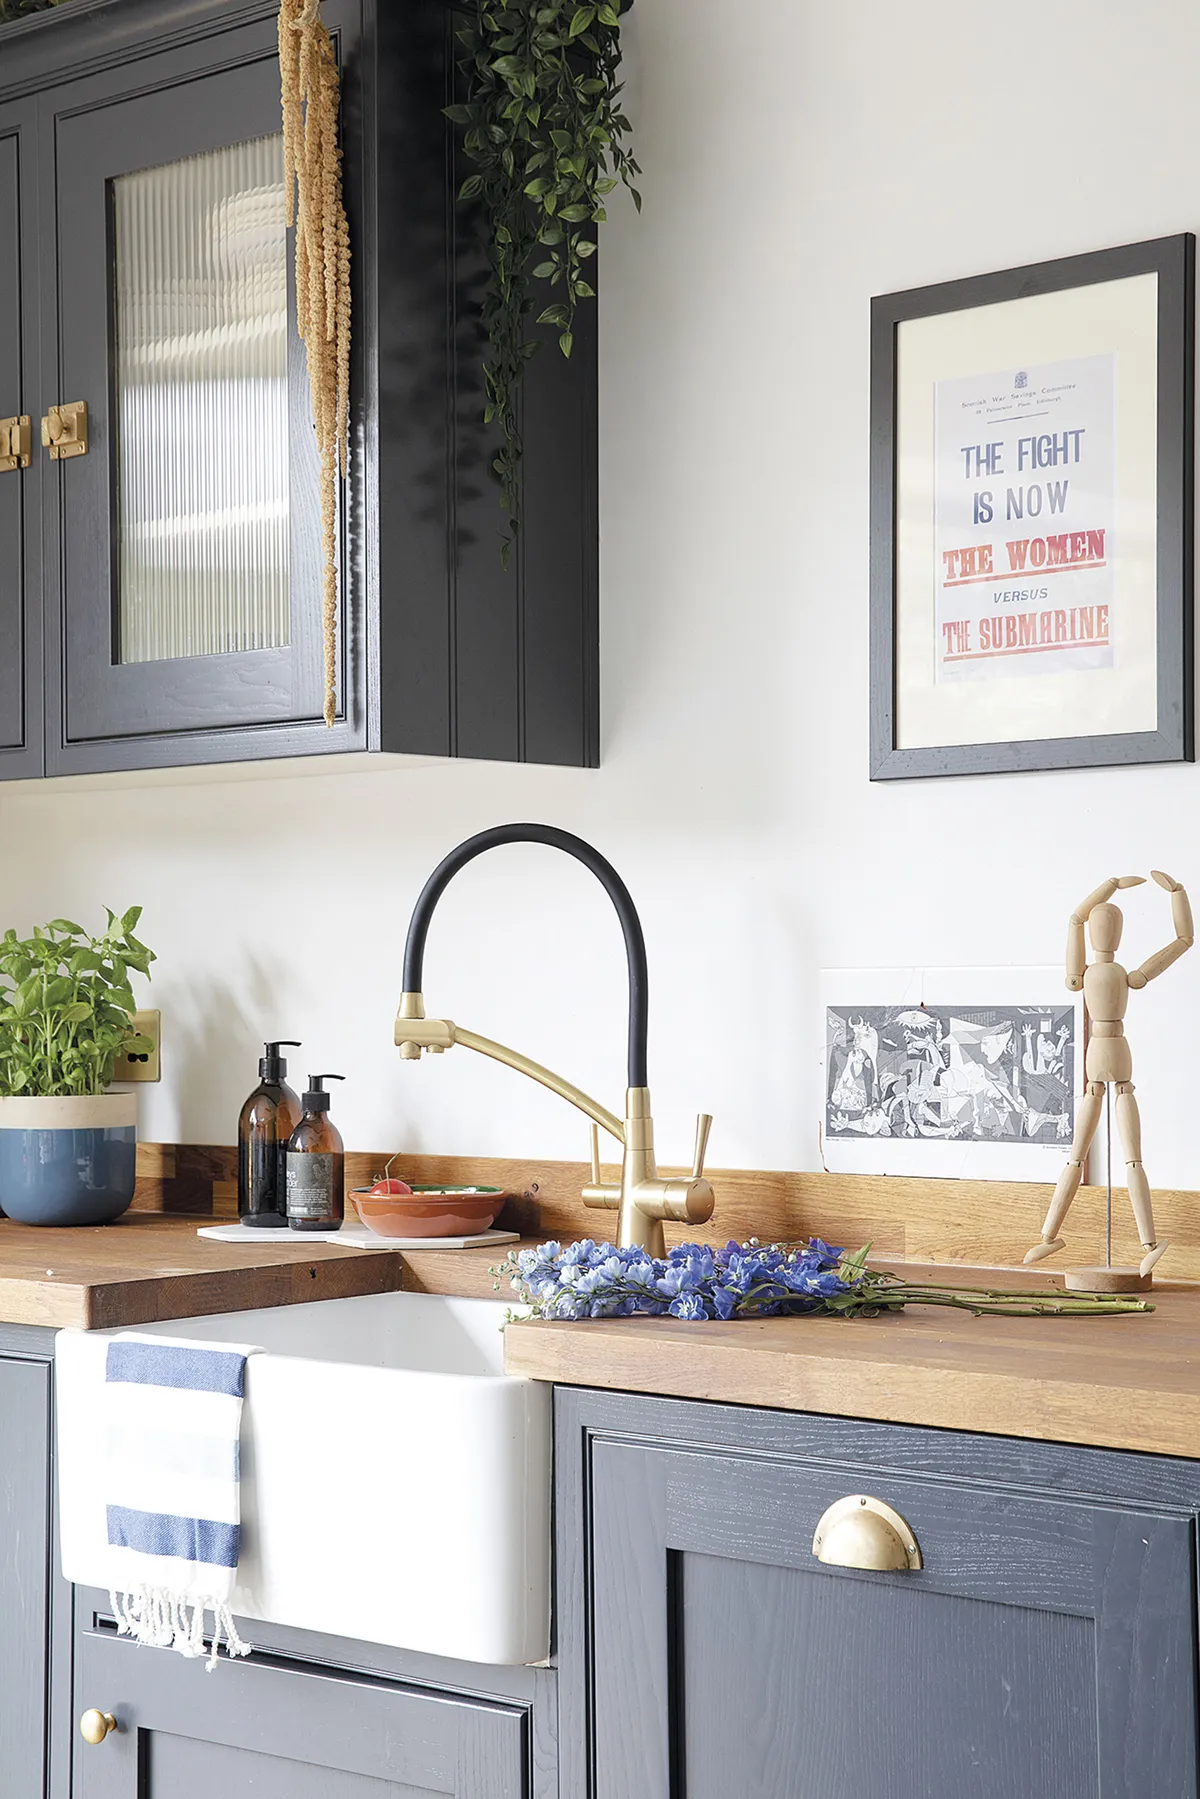 ‘I was inspired by Instagram account @thehousethatblackbuilt to buy the Gappo tap,’ says Sam. ‘We love having the flexible hose’